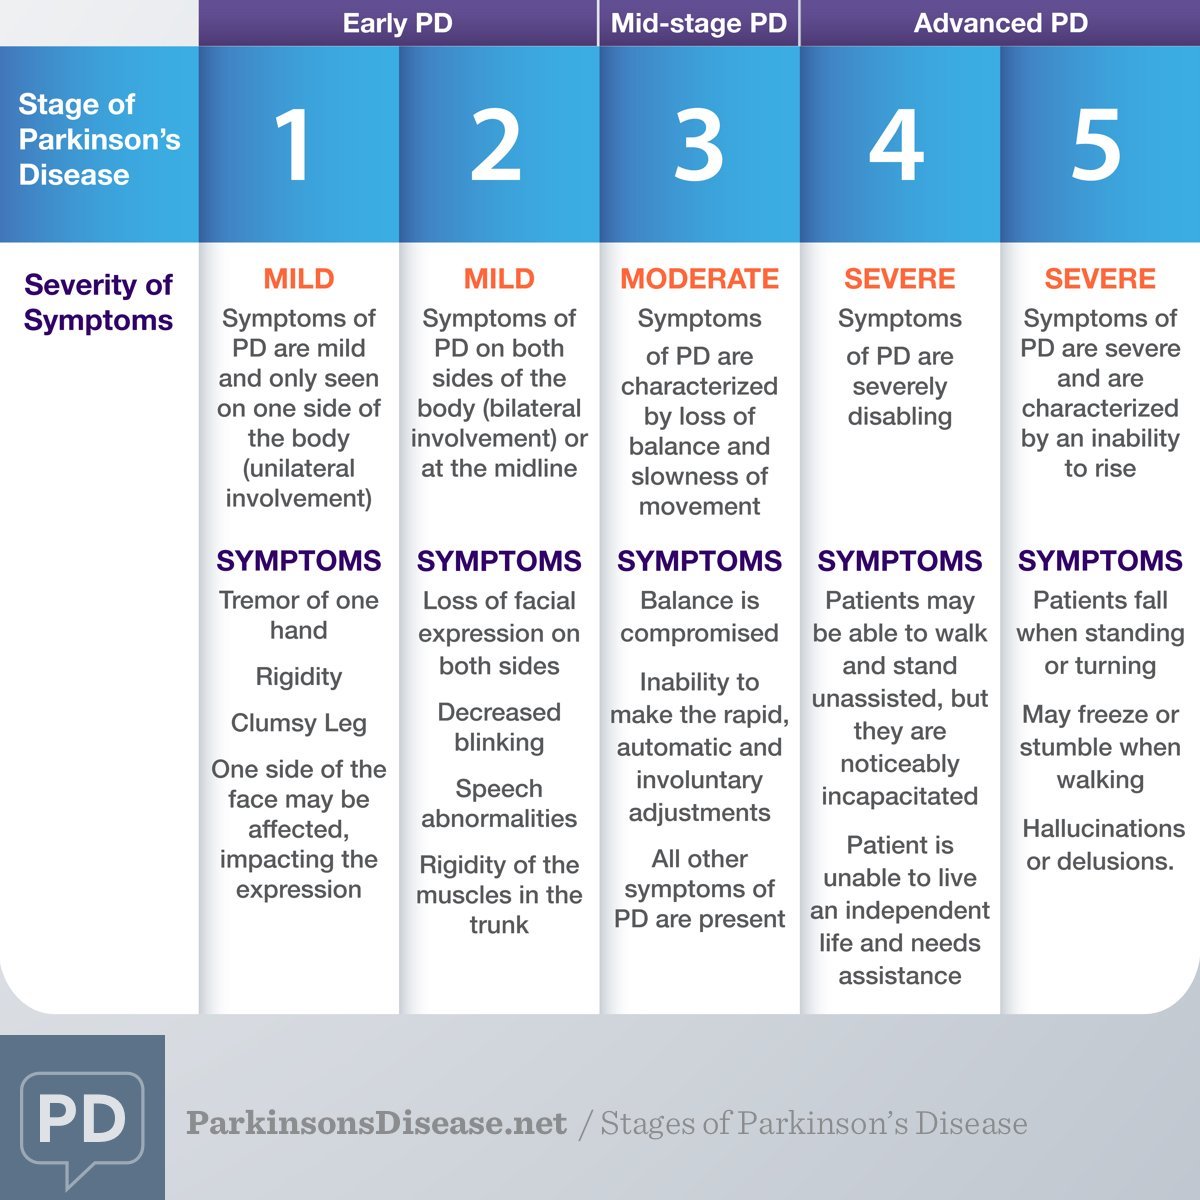 What Are the Stages of Parkinson